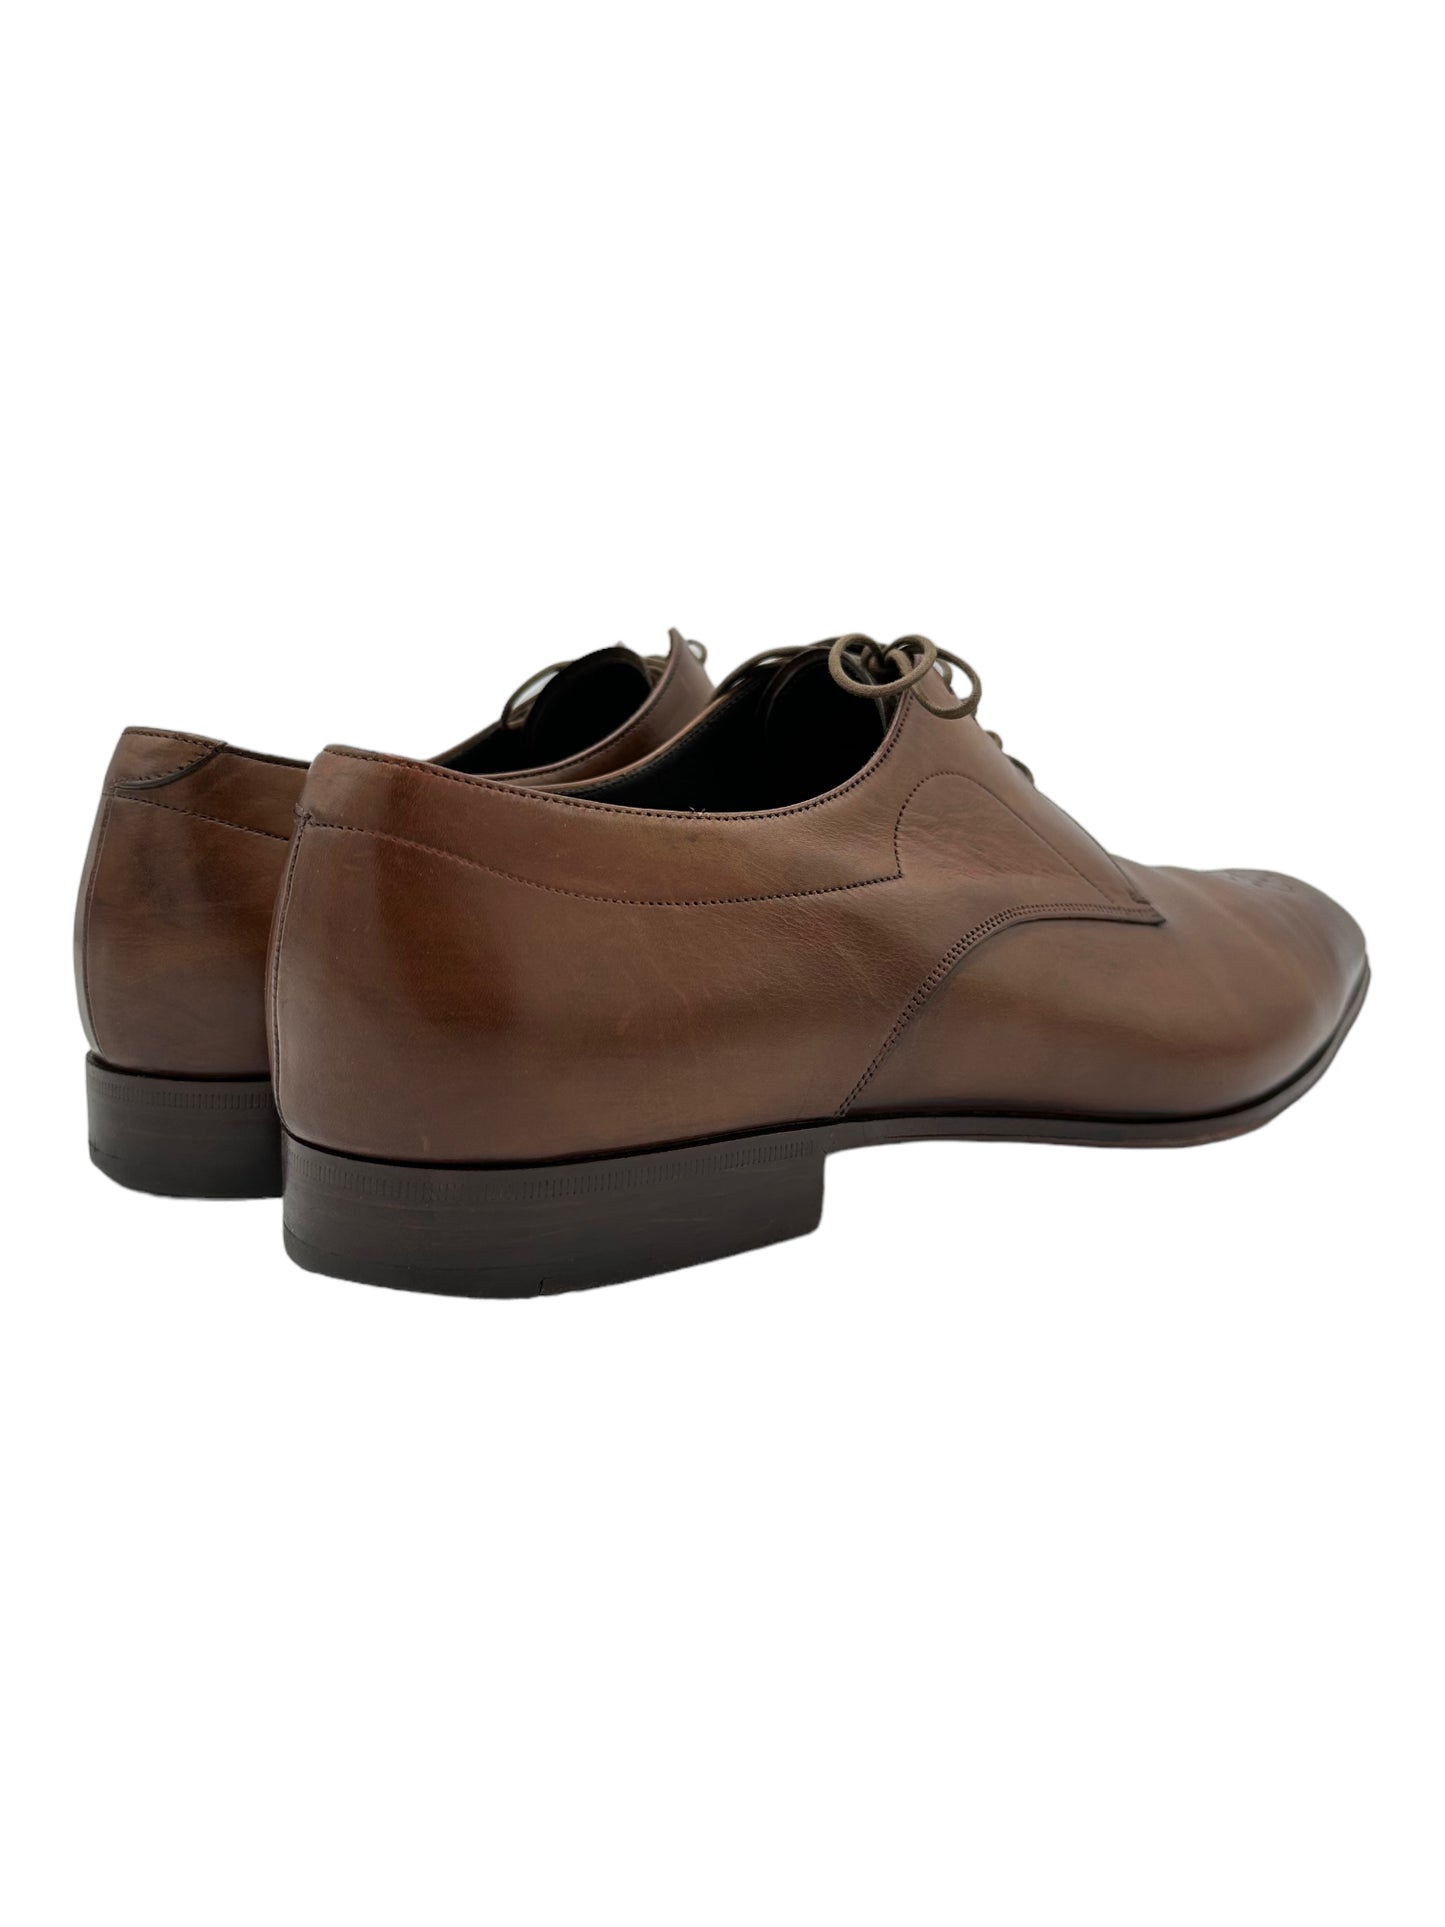 Prada Brown Leather Derby Dress Shoes